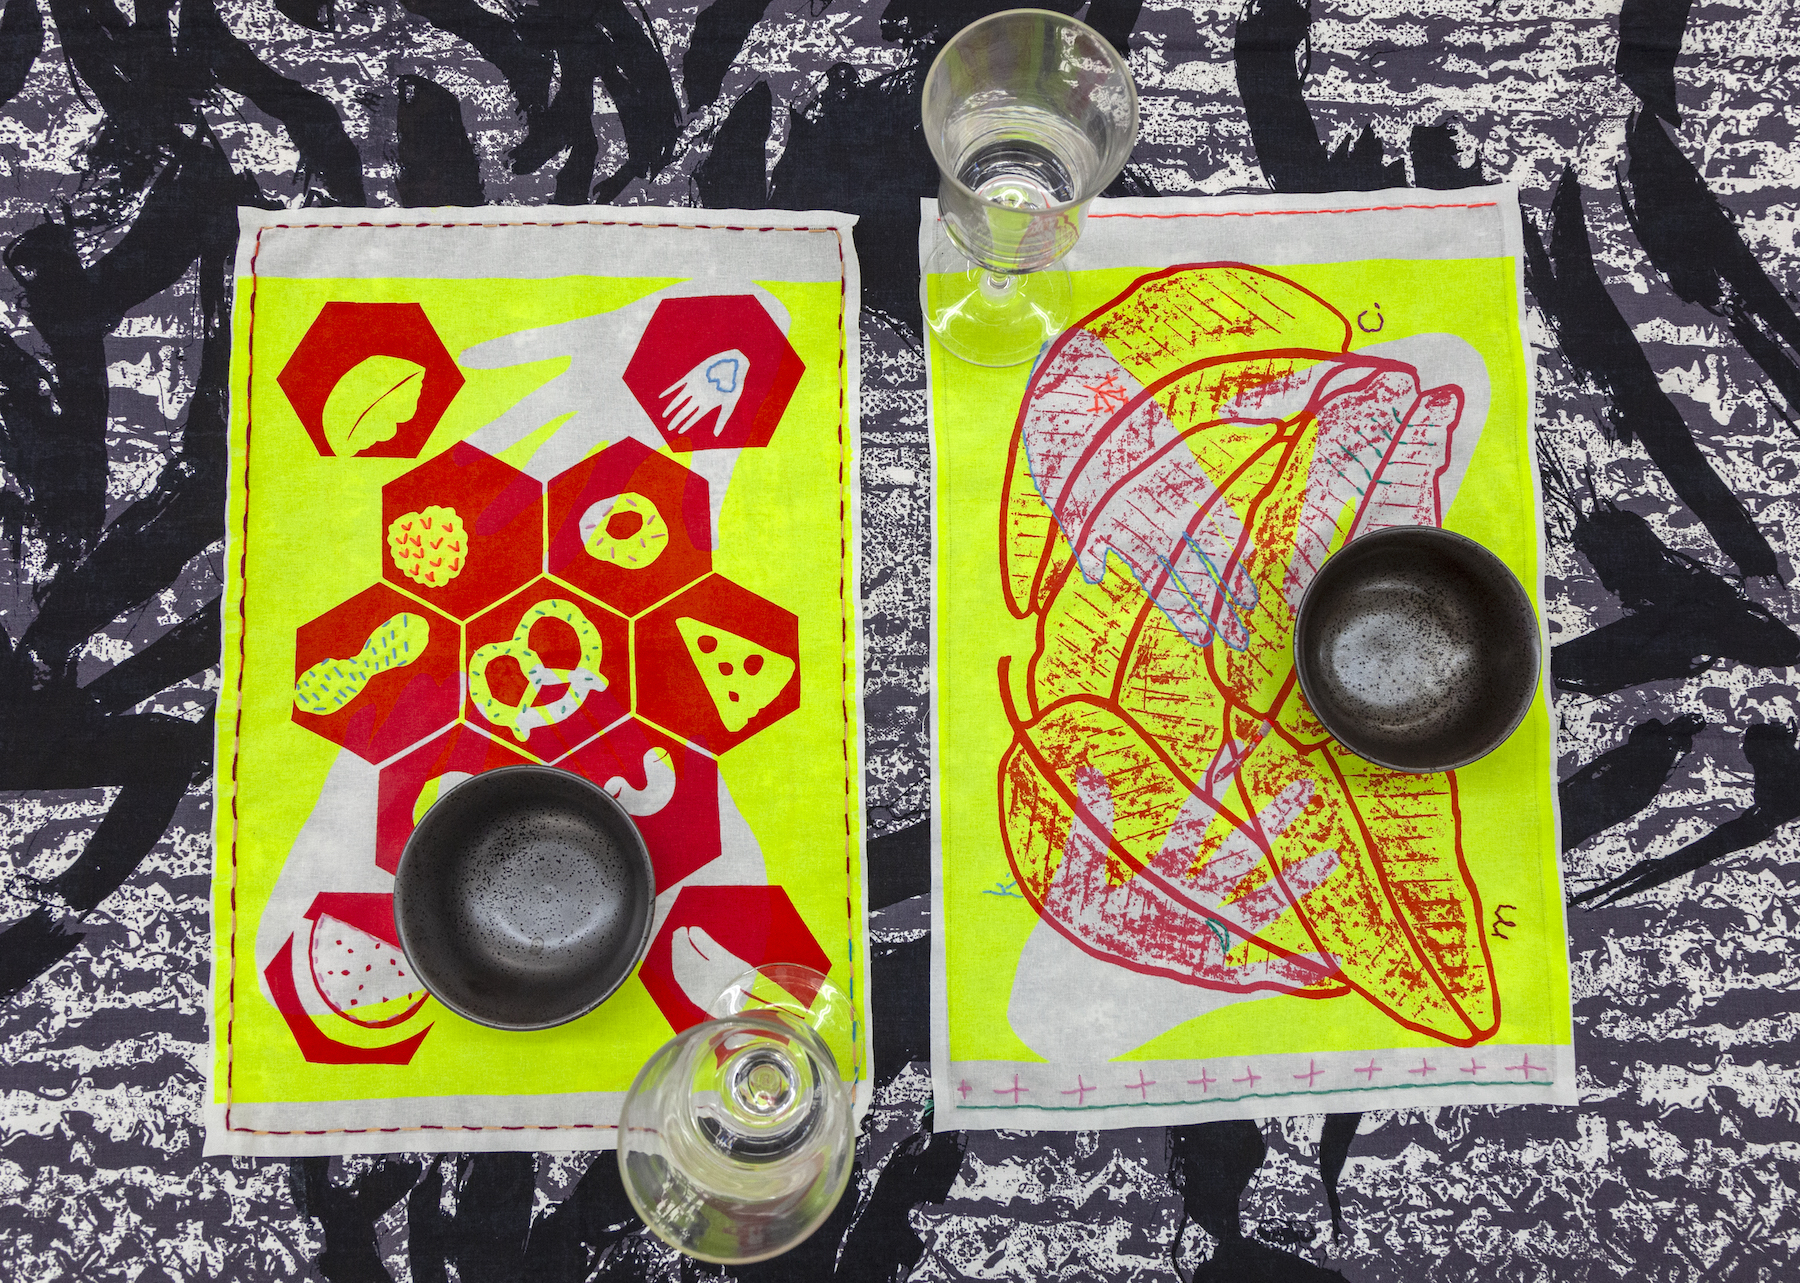 A photograph of two rectangular placemats made of fabric with a set of glasses and bowls overtop. The placemats each have a unique design printed overtop in red and bright yellow colors. On the left is a design of hexagons containing different food shapes such as pizza, pretzels, and berries. On the right is design of piled banana leaves.